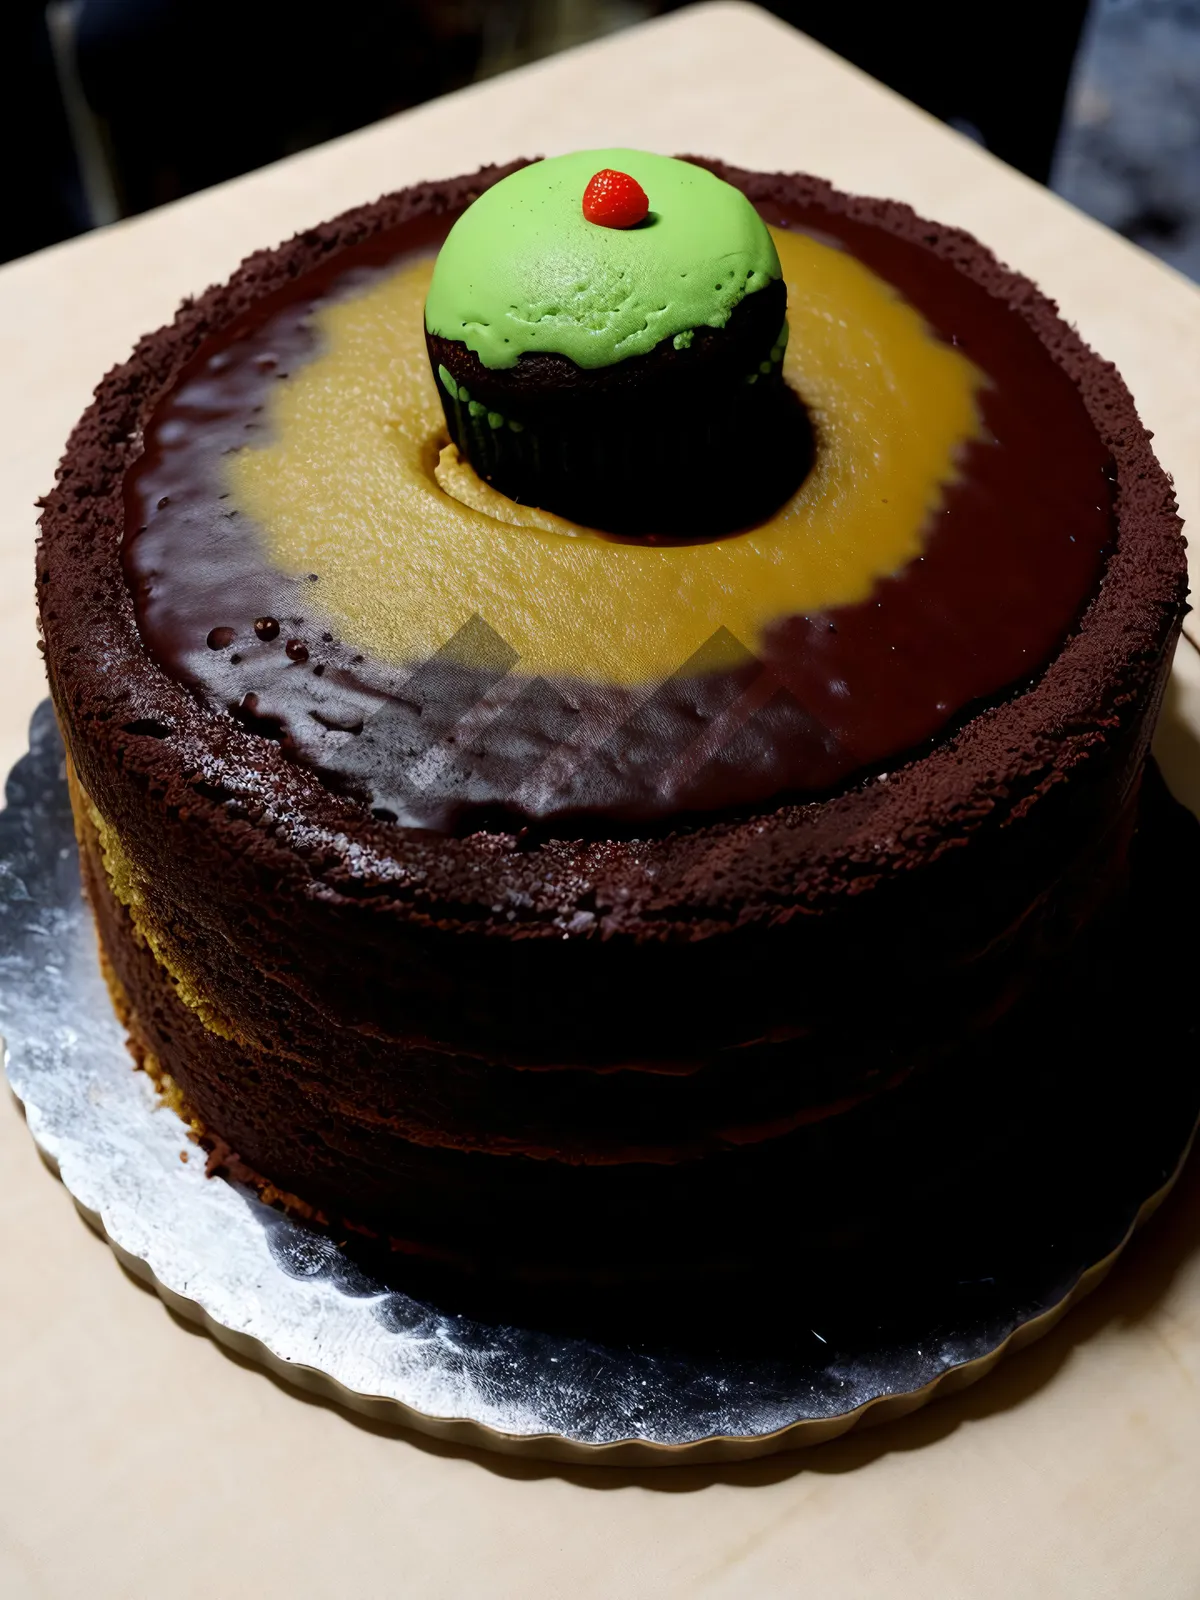 Picture of Delicious Chocolate Cake with Fruit Topping